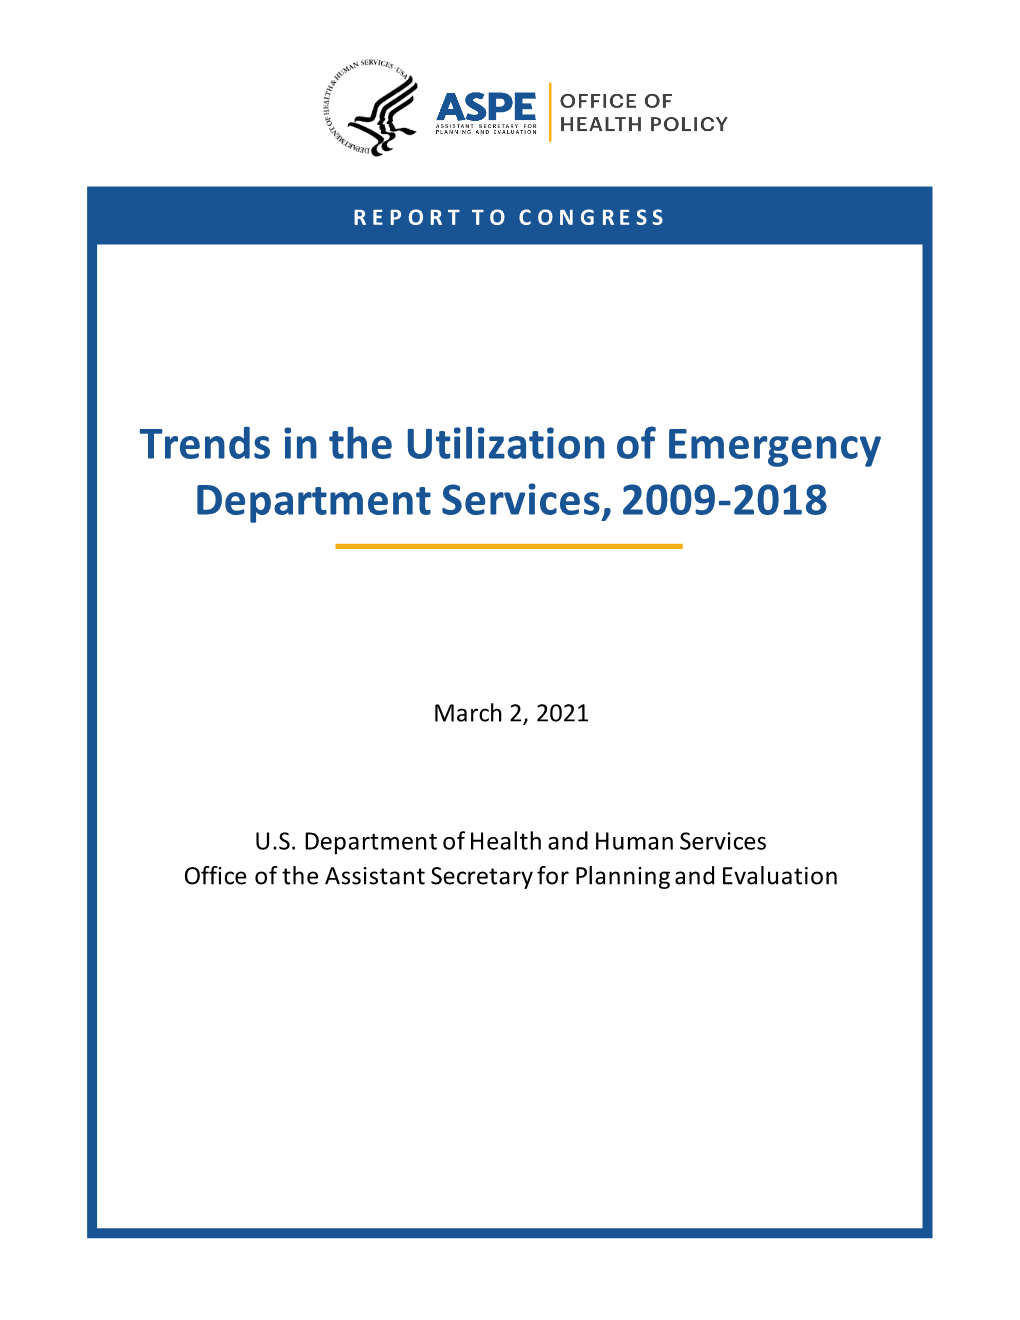 Trends in the Utilization of Emergency Department Services, 2009-2018